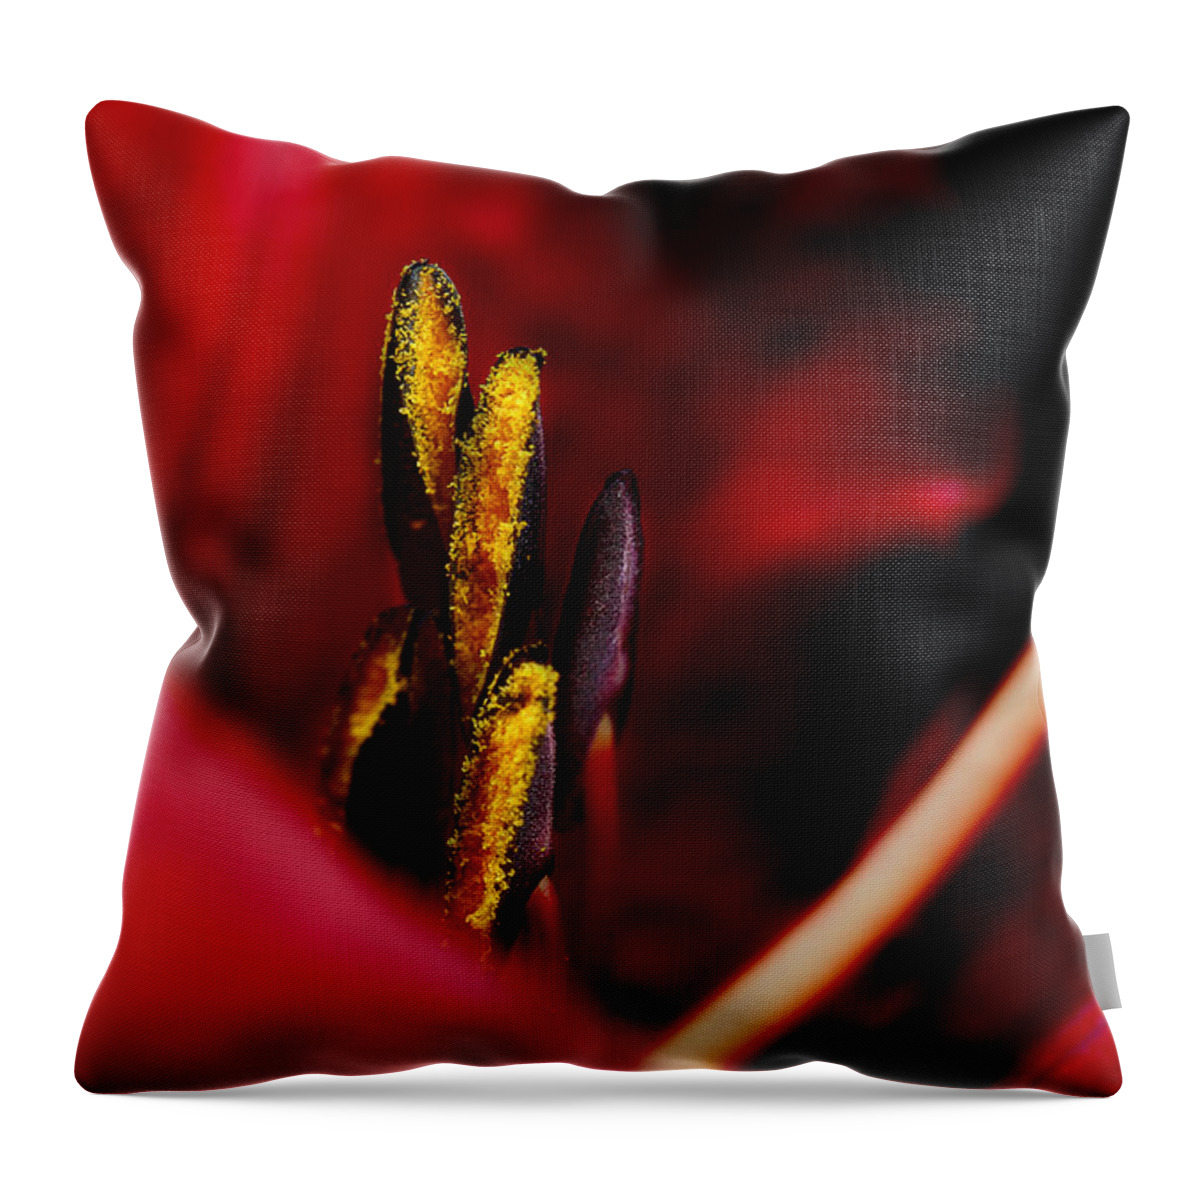 Scarlet Colored Lily Throw Pillow featuring the photograph The Insiders by Michael Eingle